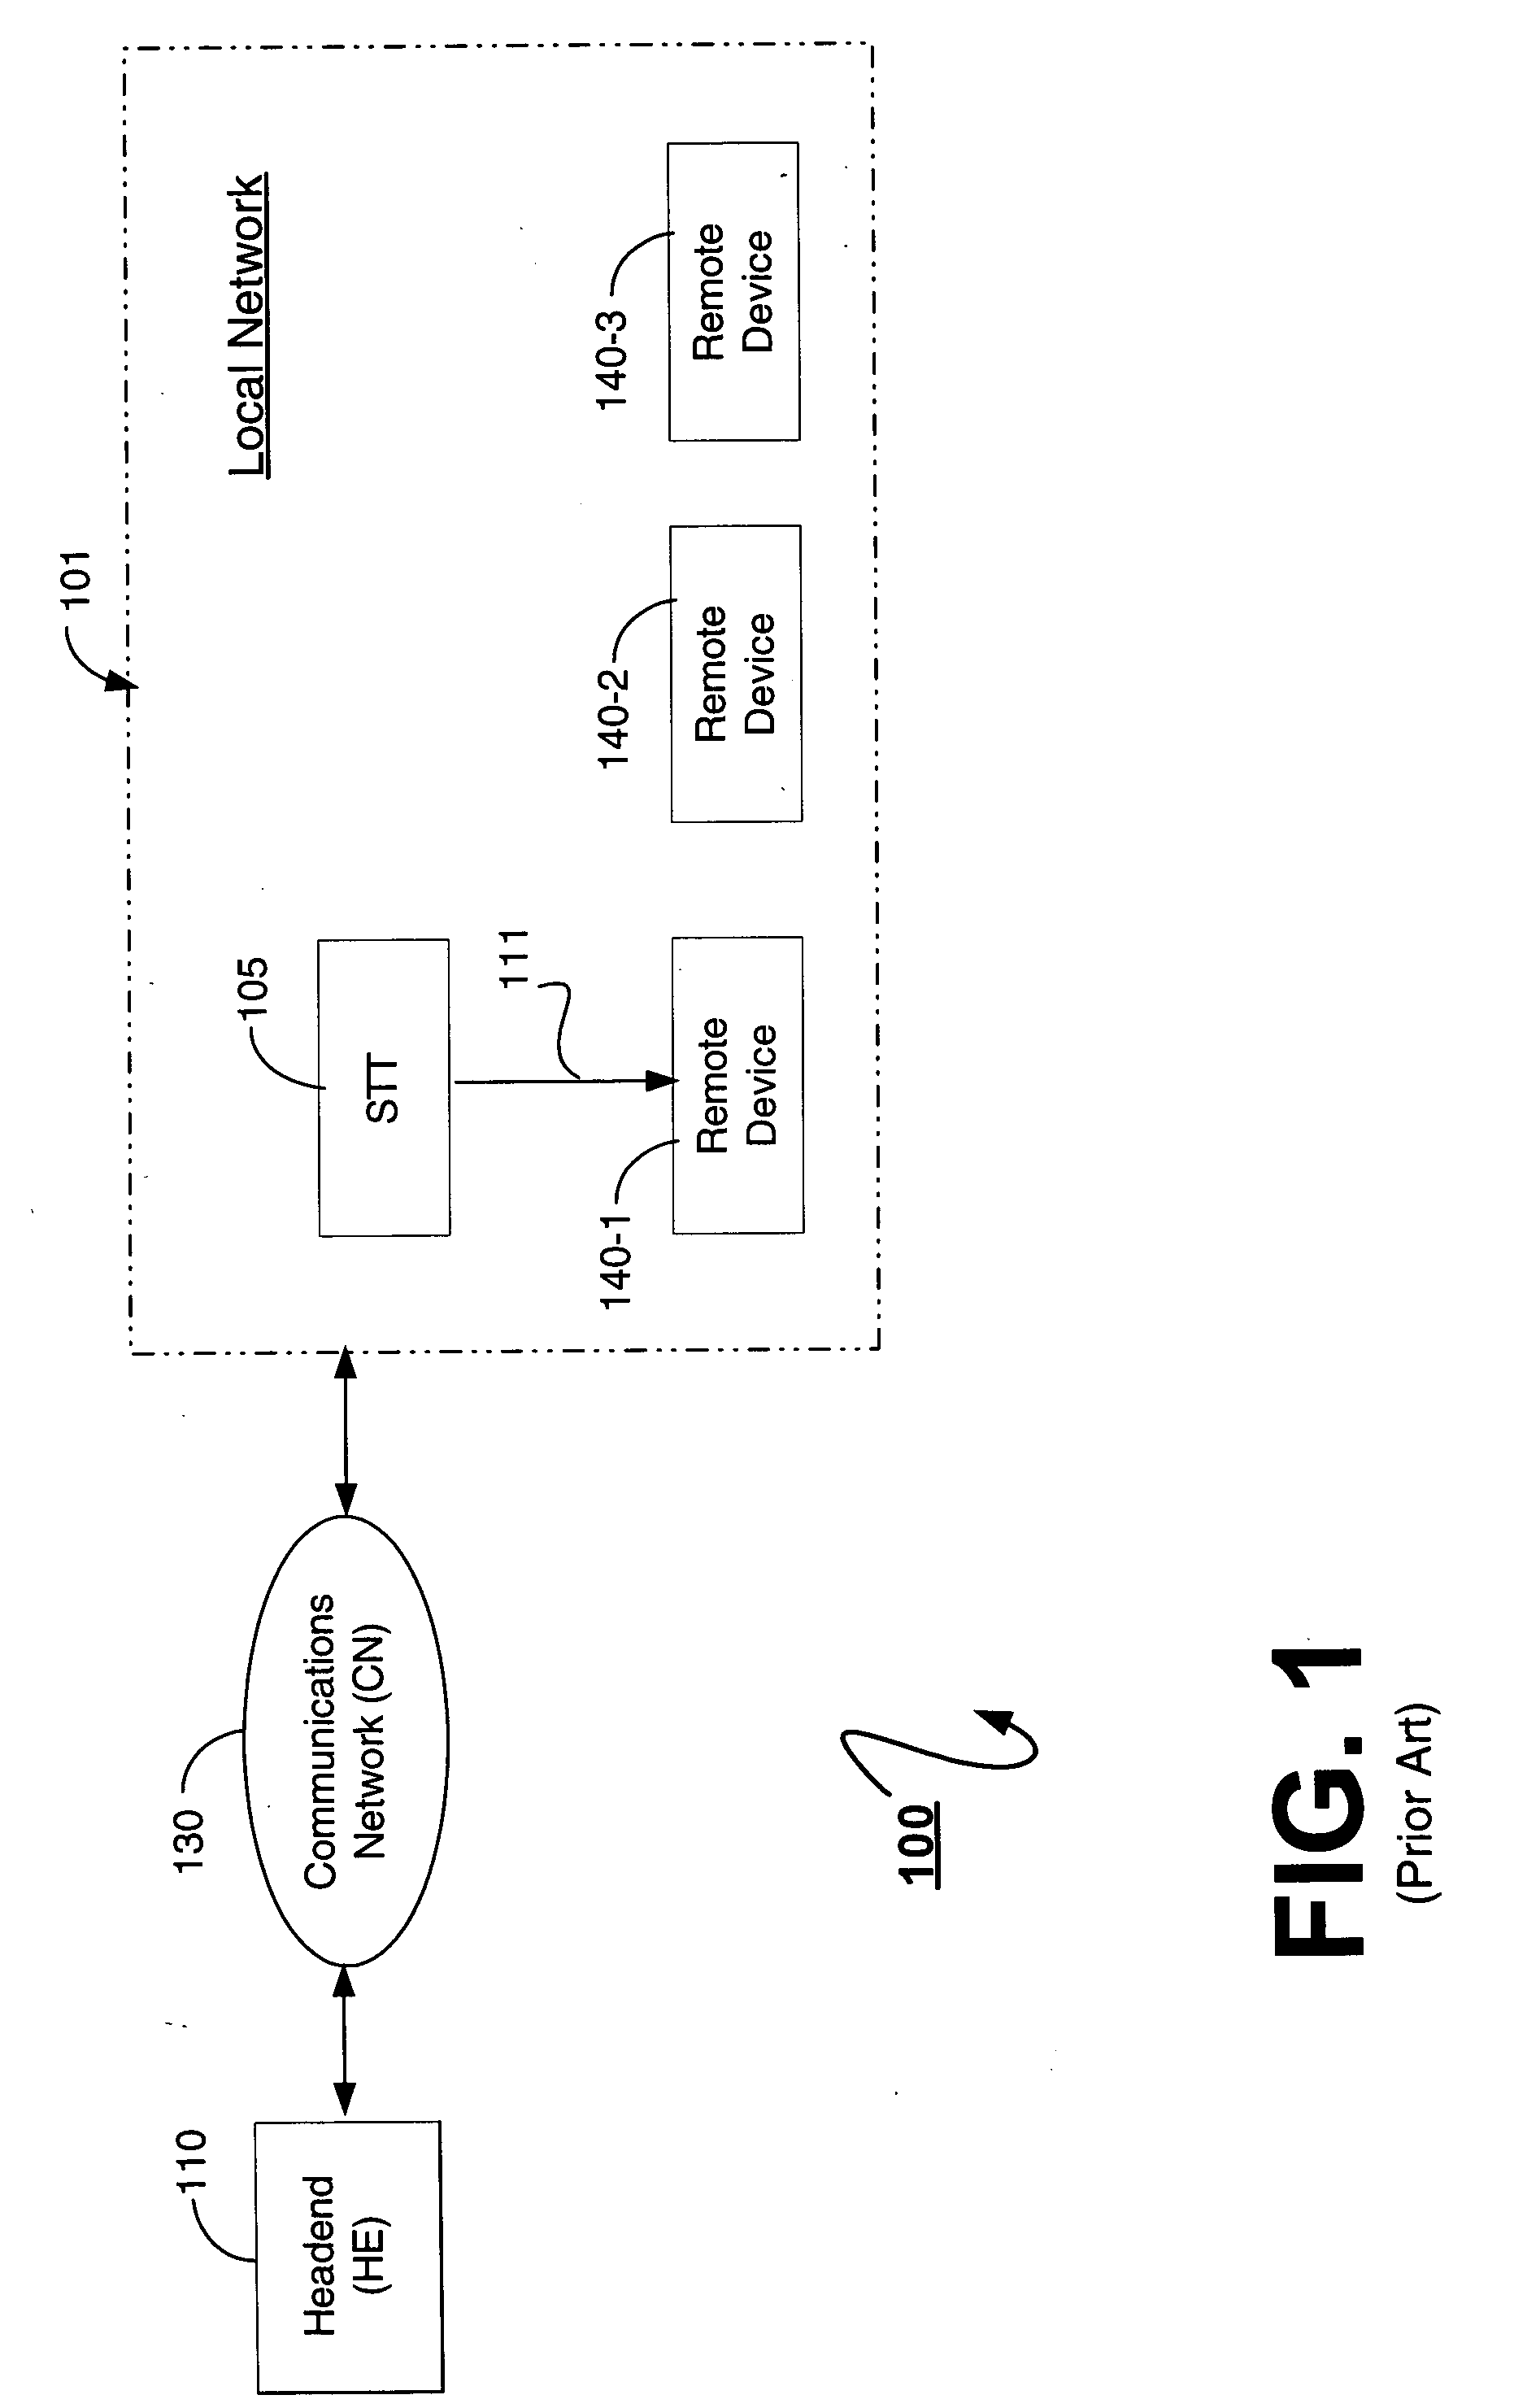 Networked multimedia system having a multi-room interactive network guide